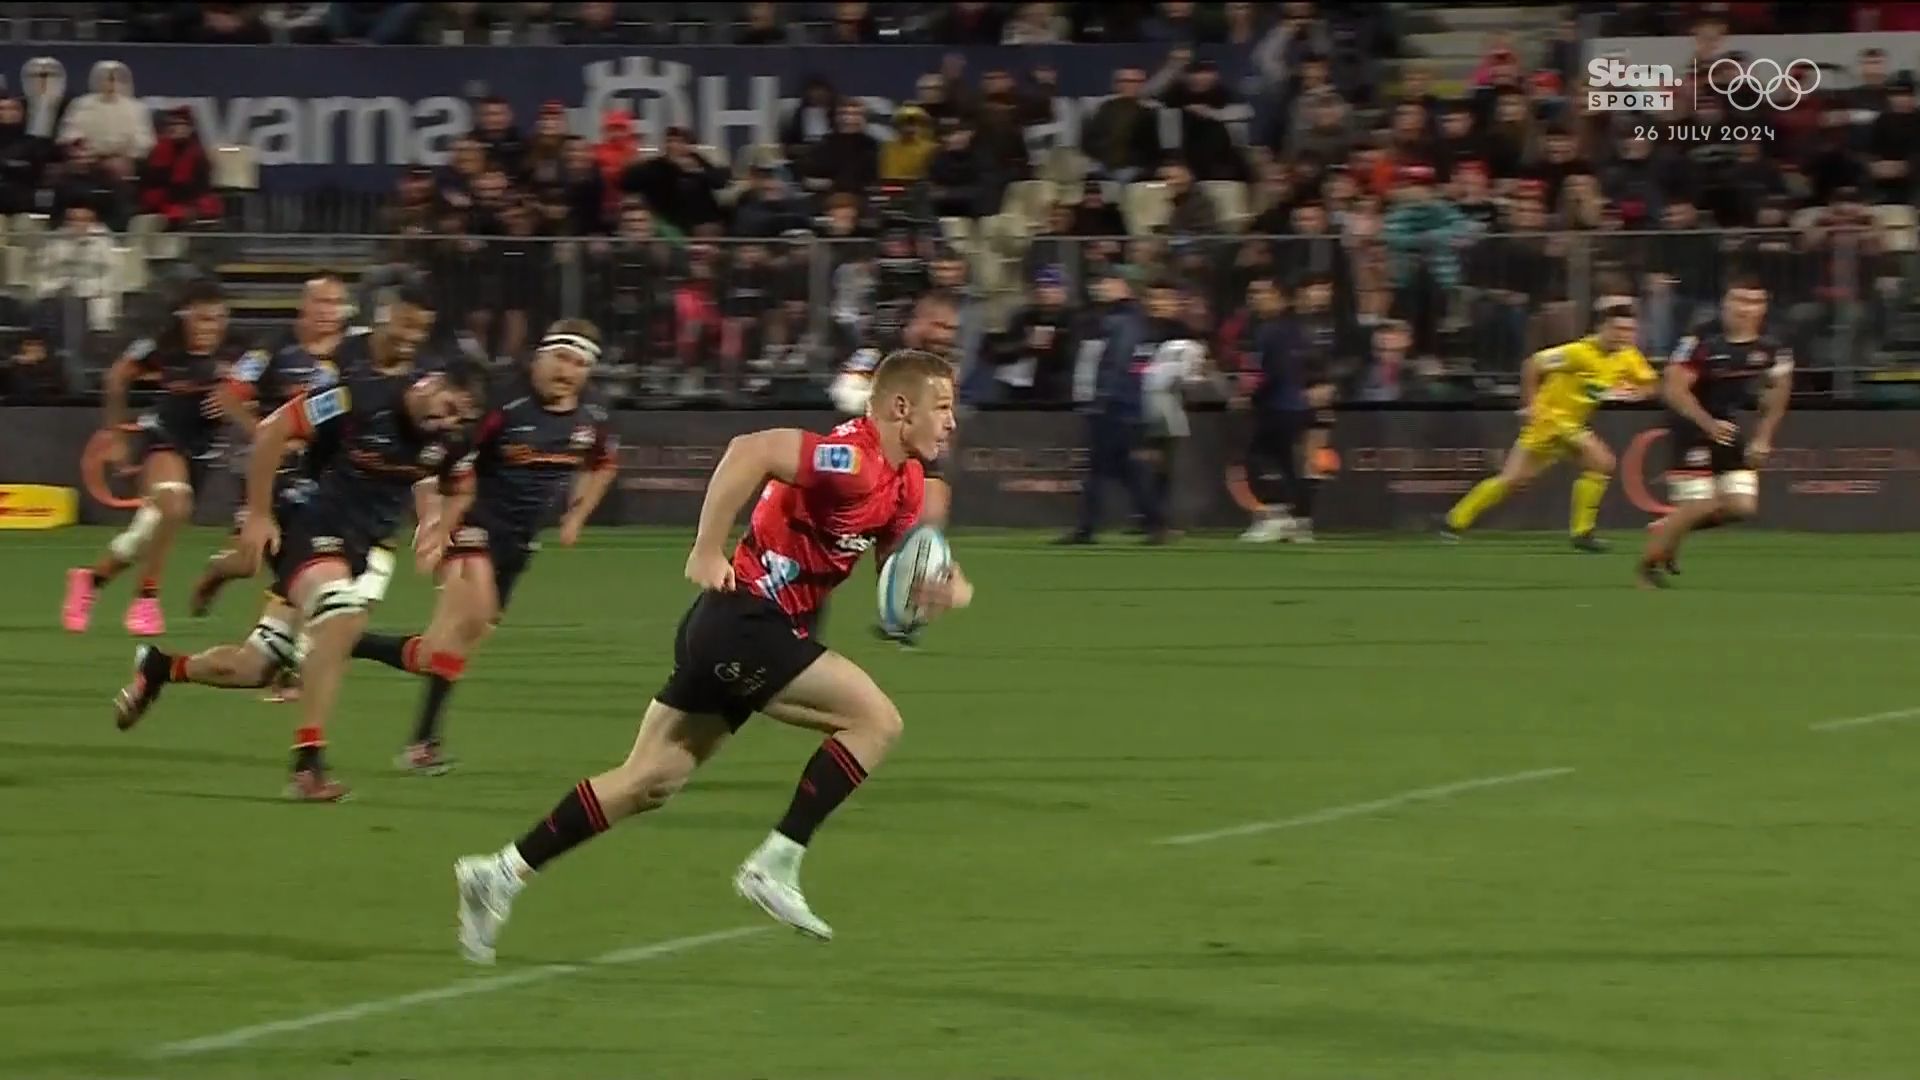 The 2820-day wait: Johnny McNicholl's 'fairytale' homecoming ends Crusaders' rotten run